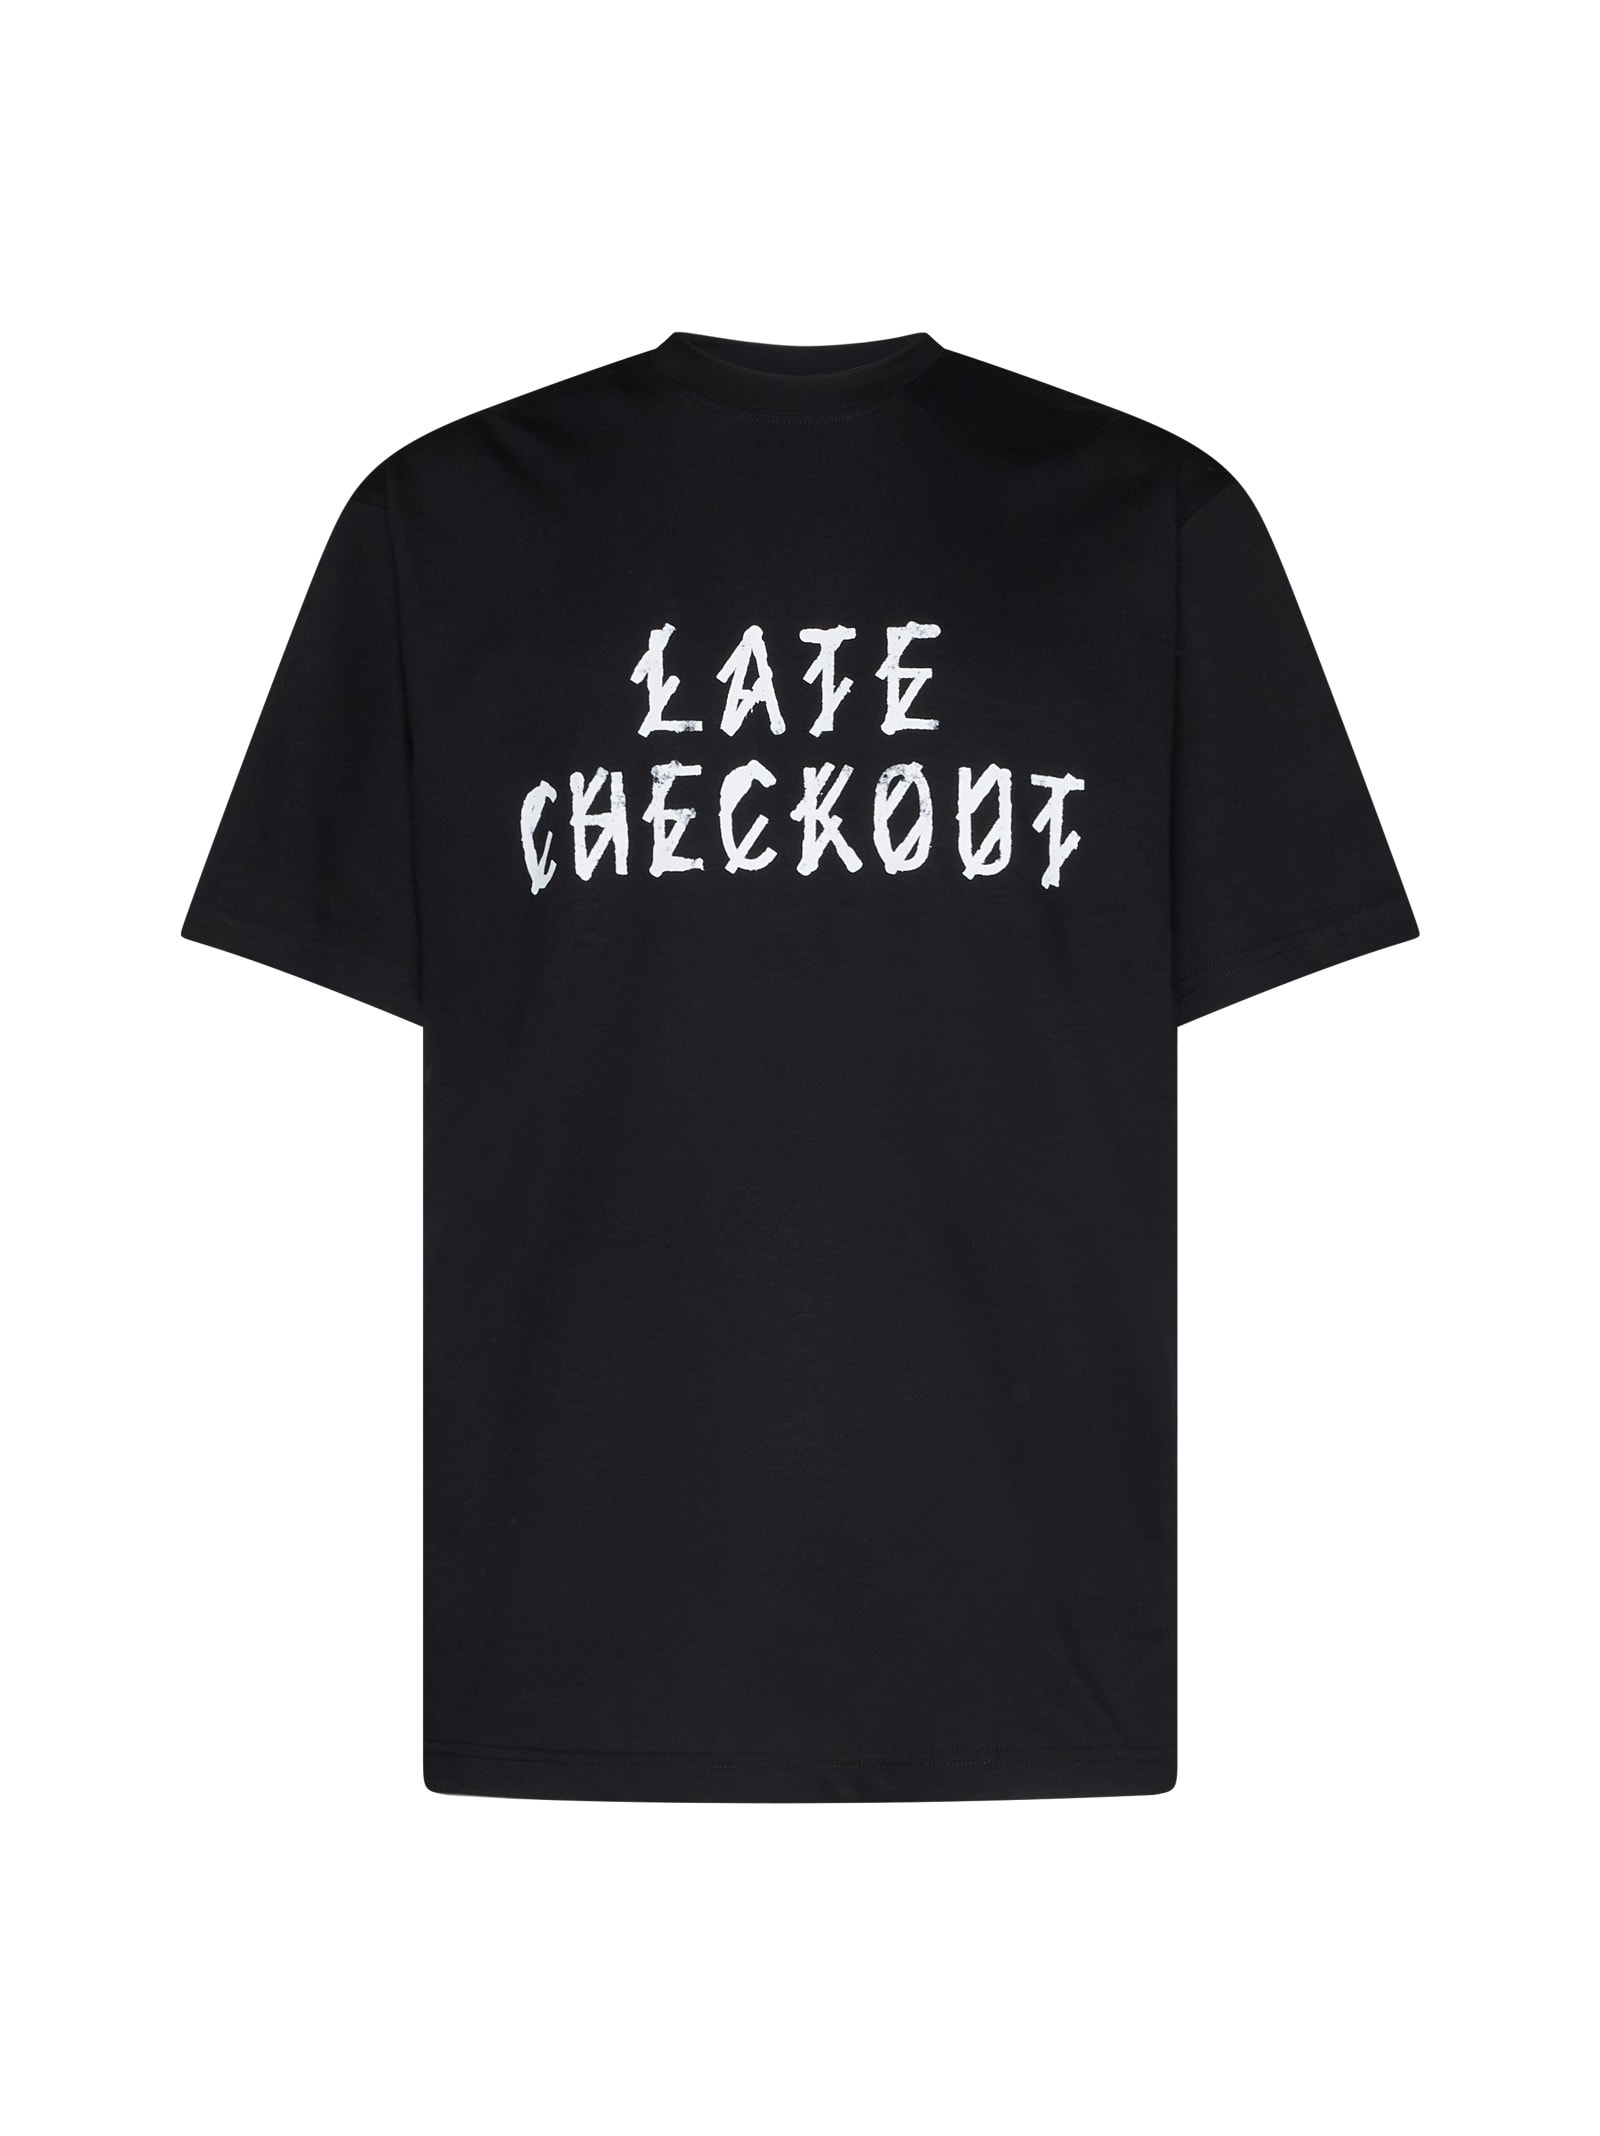 Shop 44 Label Group T-shirt In Balck+late Checkout